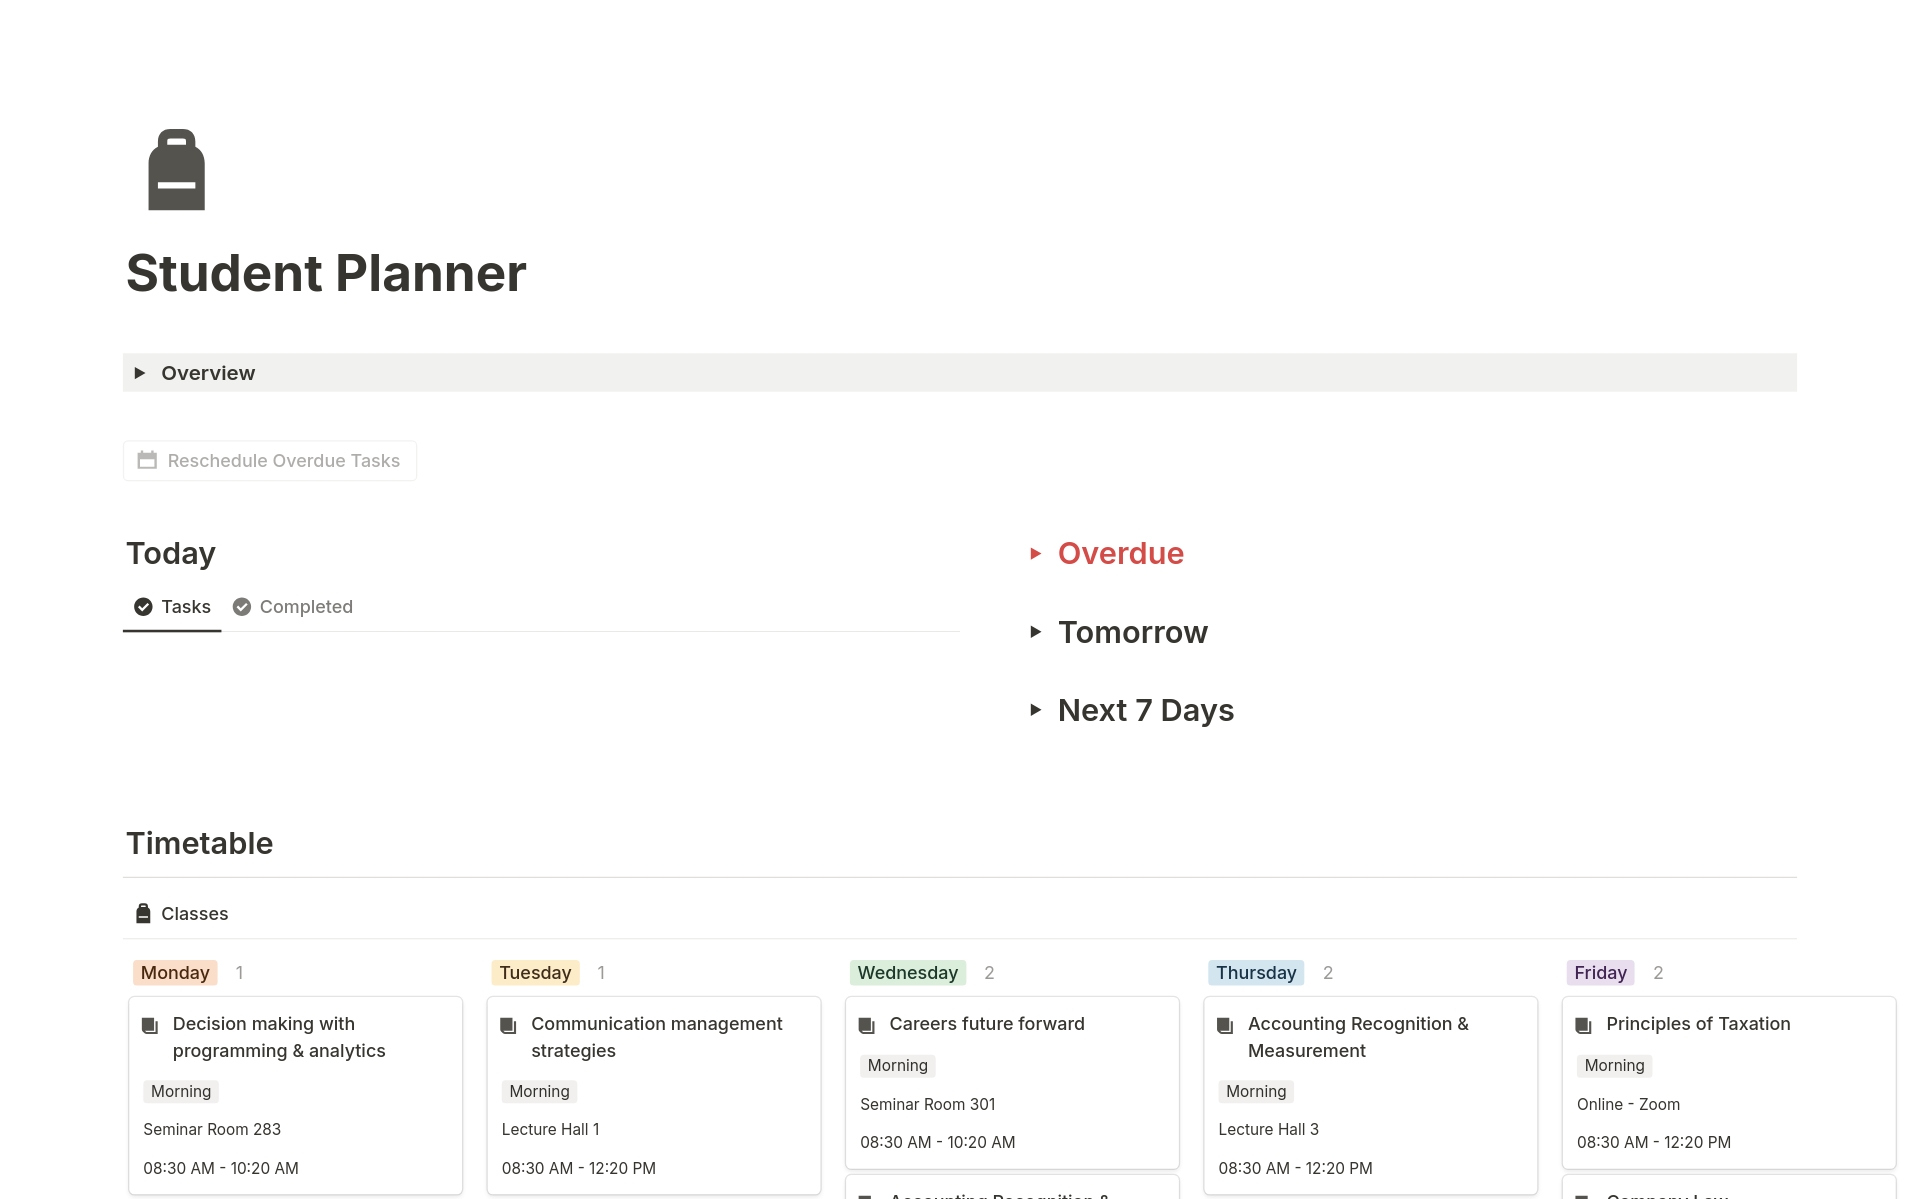 The Student Planner is a comprehensive Notion template that empowers students to effectively manage tasks, timetable, and academic deadlines, boosting productivity and facilitating success.